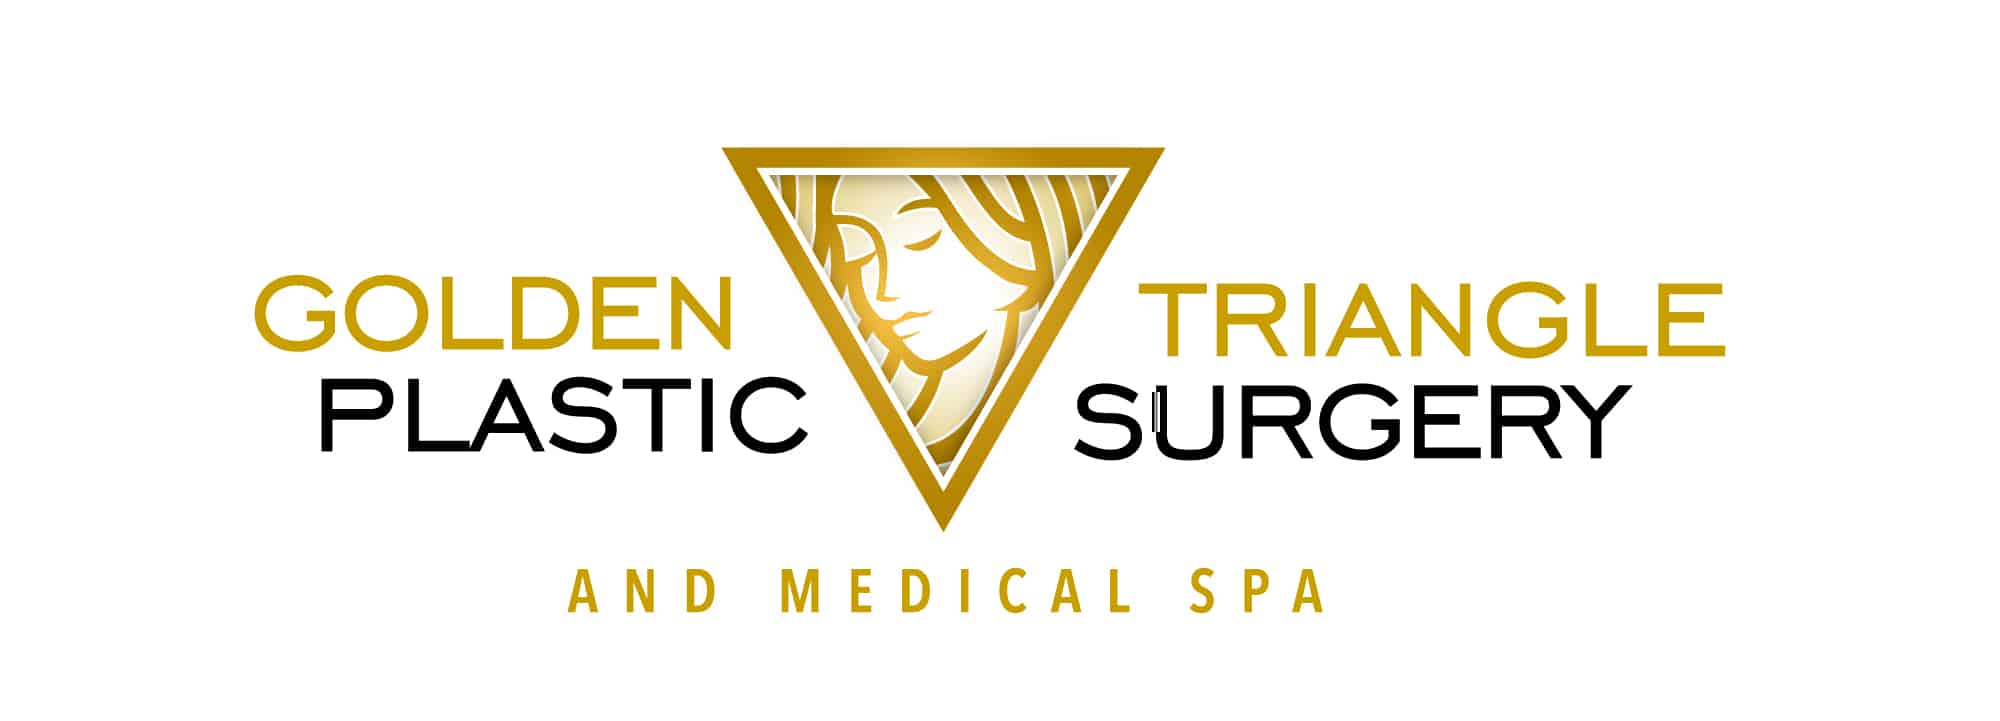 Golden triangle plastic surgery and medical spa logo.